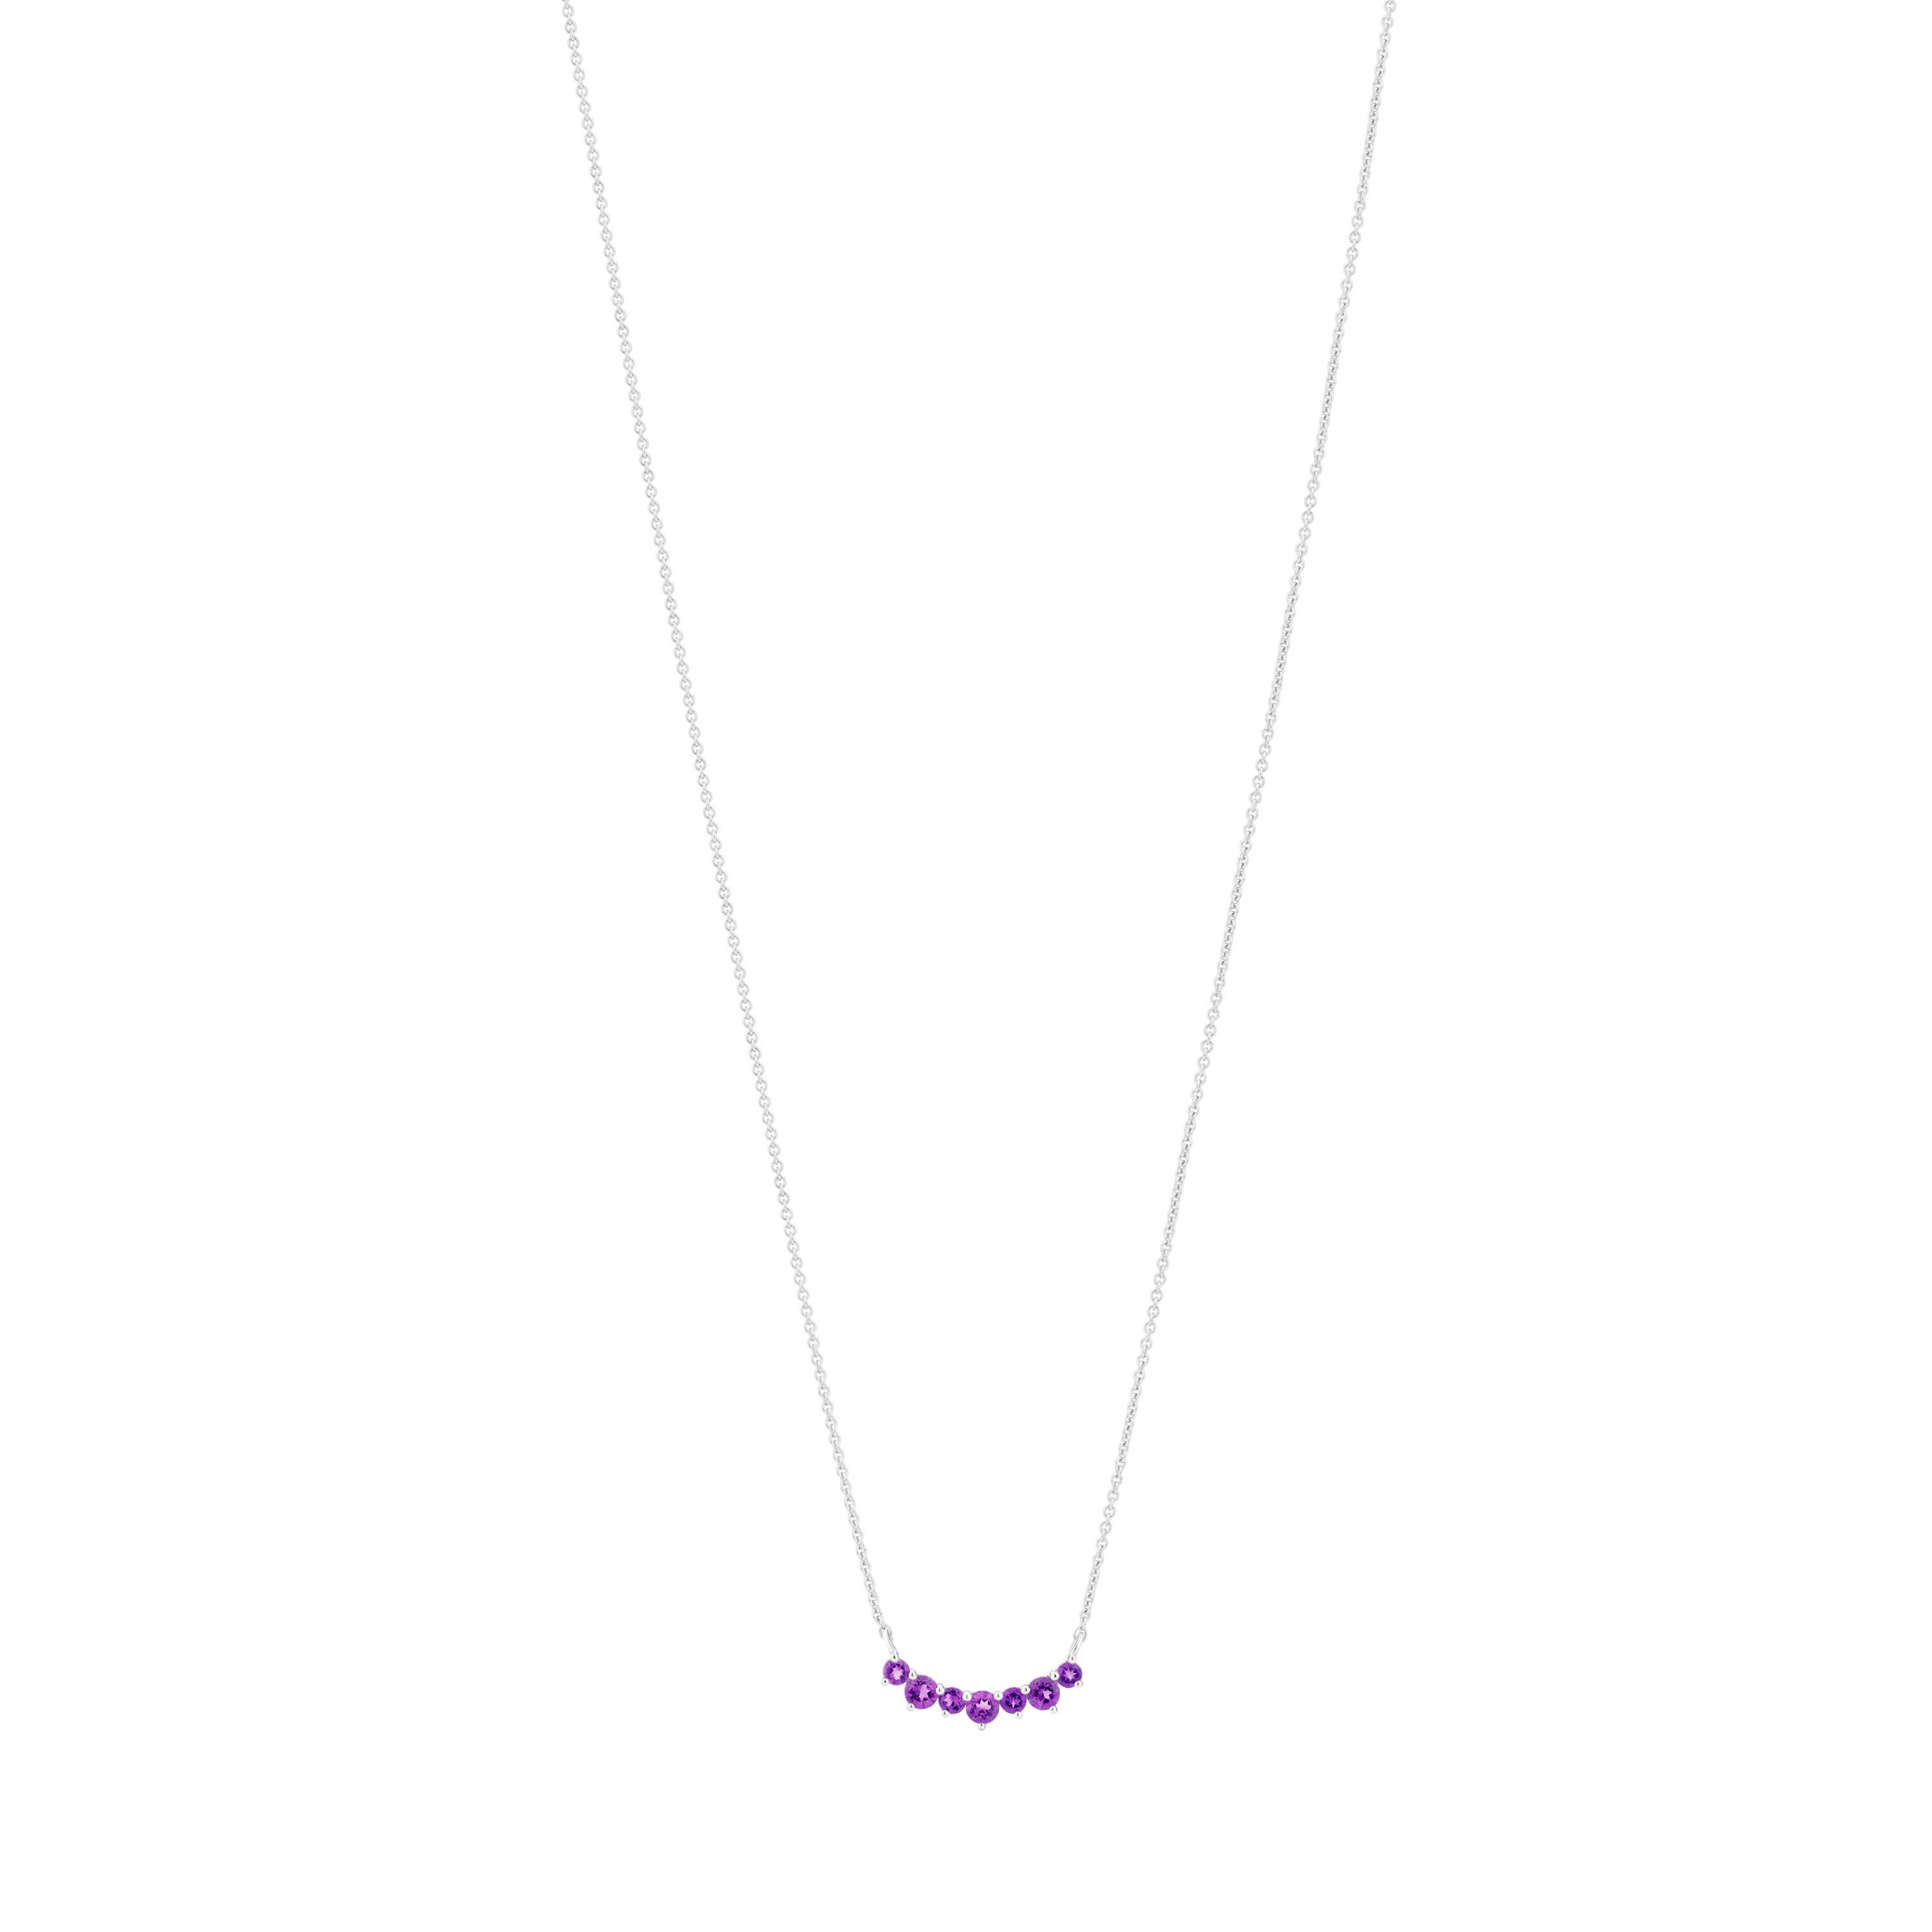 This Gemistry Amethyst Pendant Necklace is Hand Crafted in 14k white gold. It features three 2.50mm with four 2mm round alternating genuine amethyst stones in a prong setting. It Includes Rolo chain measuring 18 inches with lobster closure. The drop